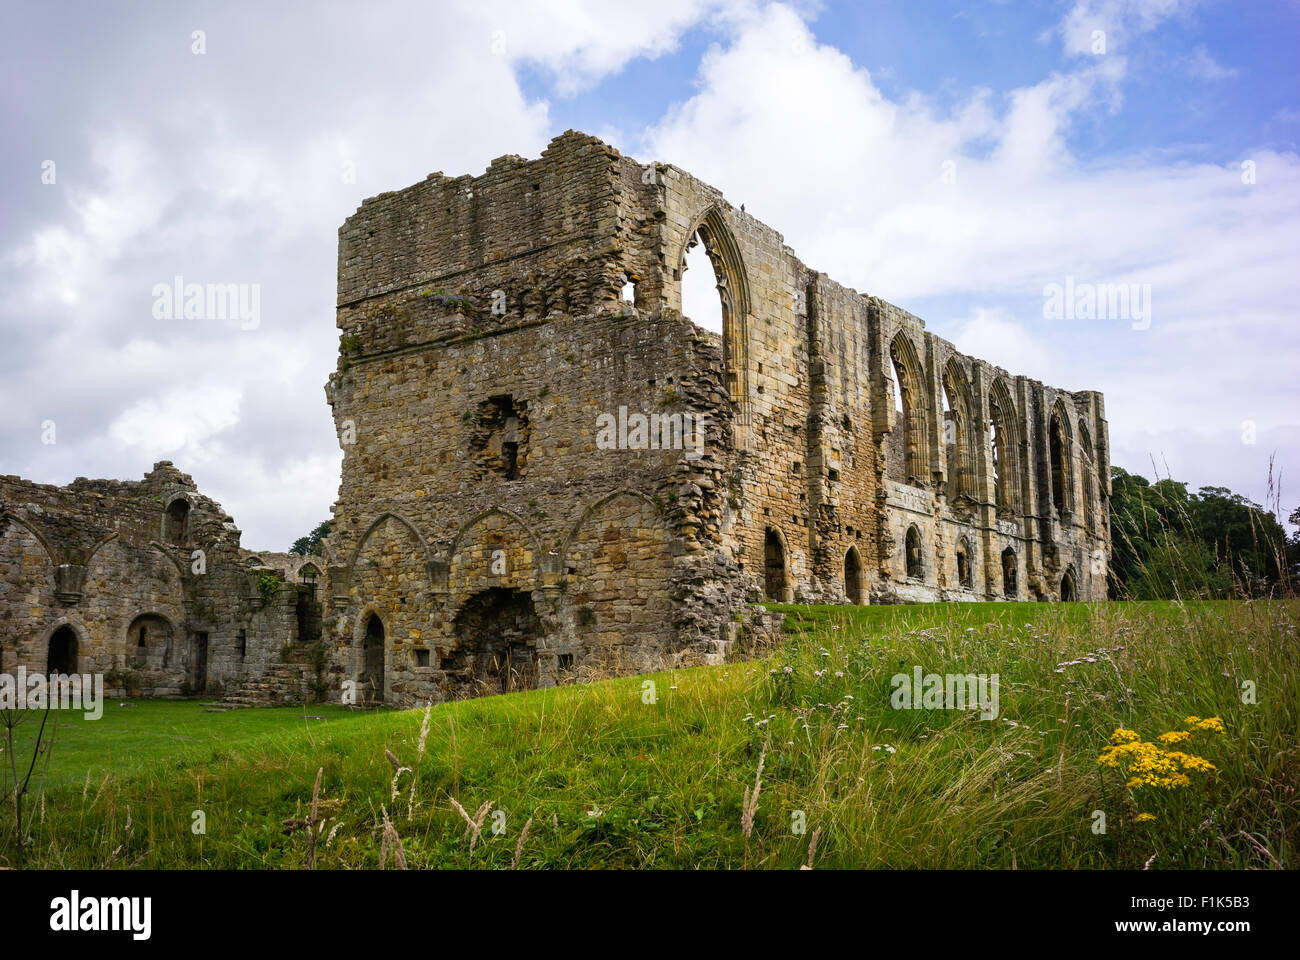 The imposing ruins of Easby Abbey near Richmond, North Yorkshire, England, UK Stock Photo